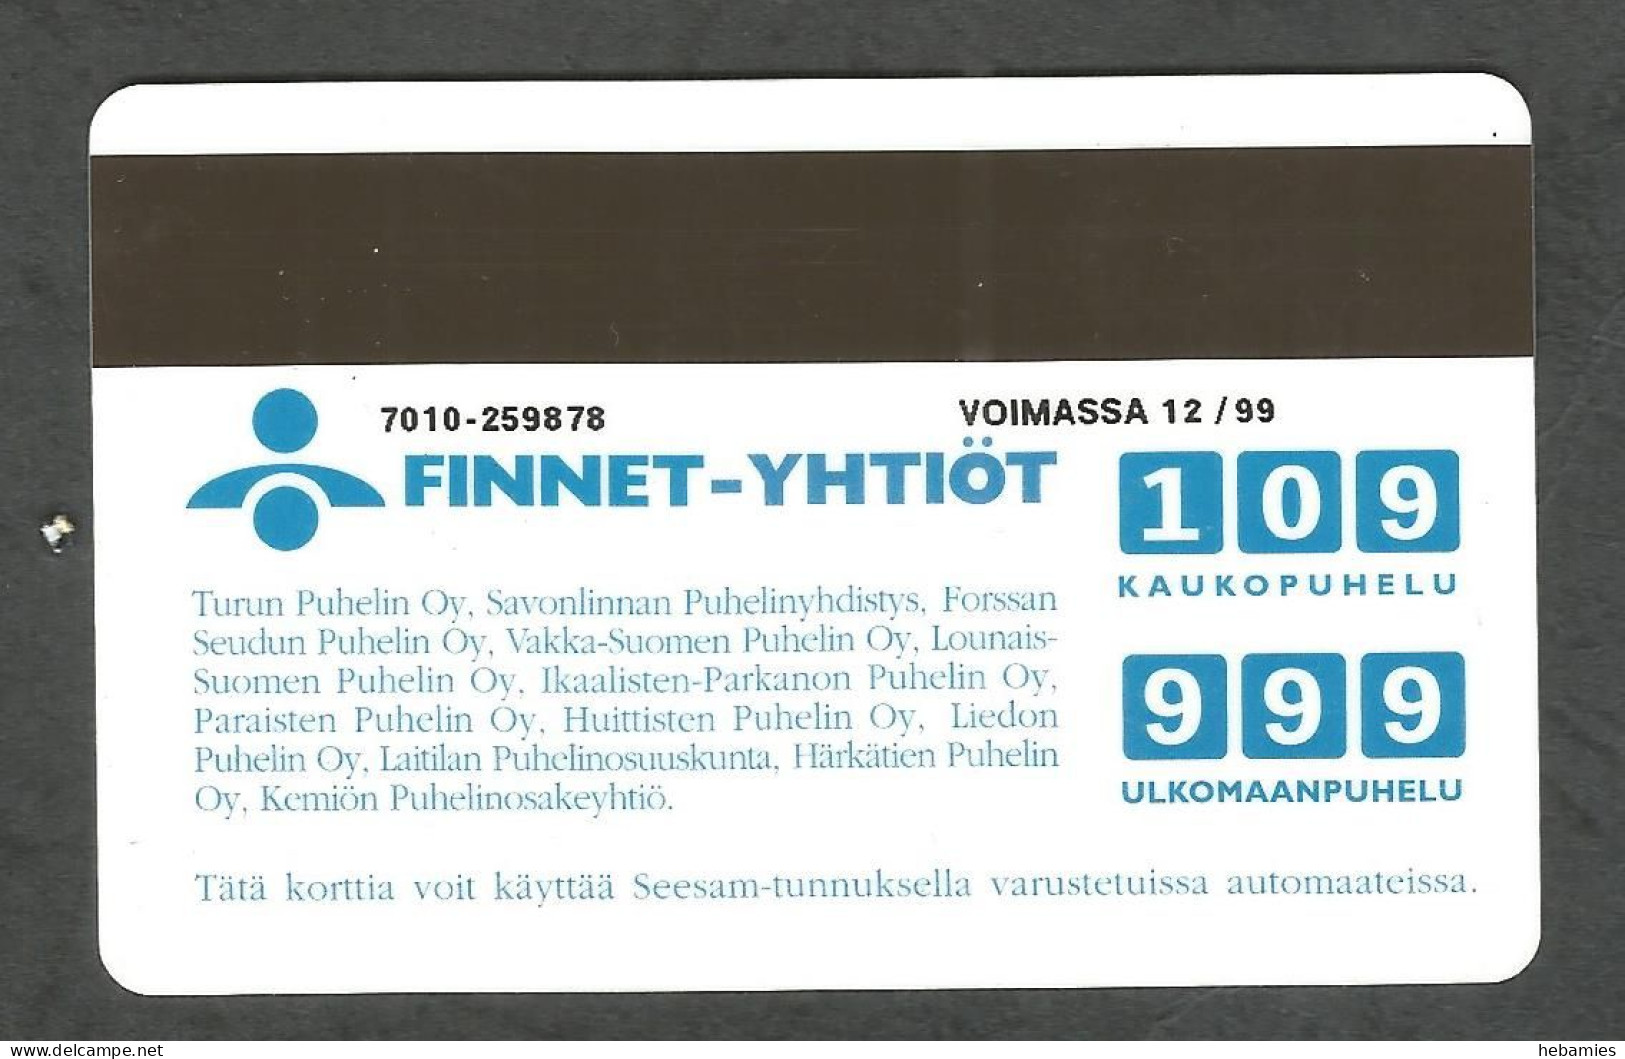 REEF KNOT - 10 FIM  1998  - Magnetic Card - D354 - FINLAND - - Boats